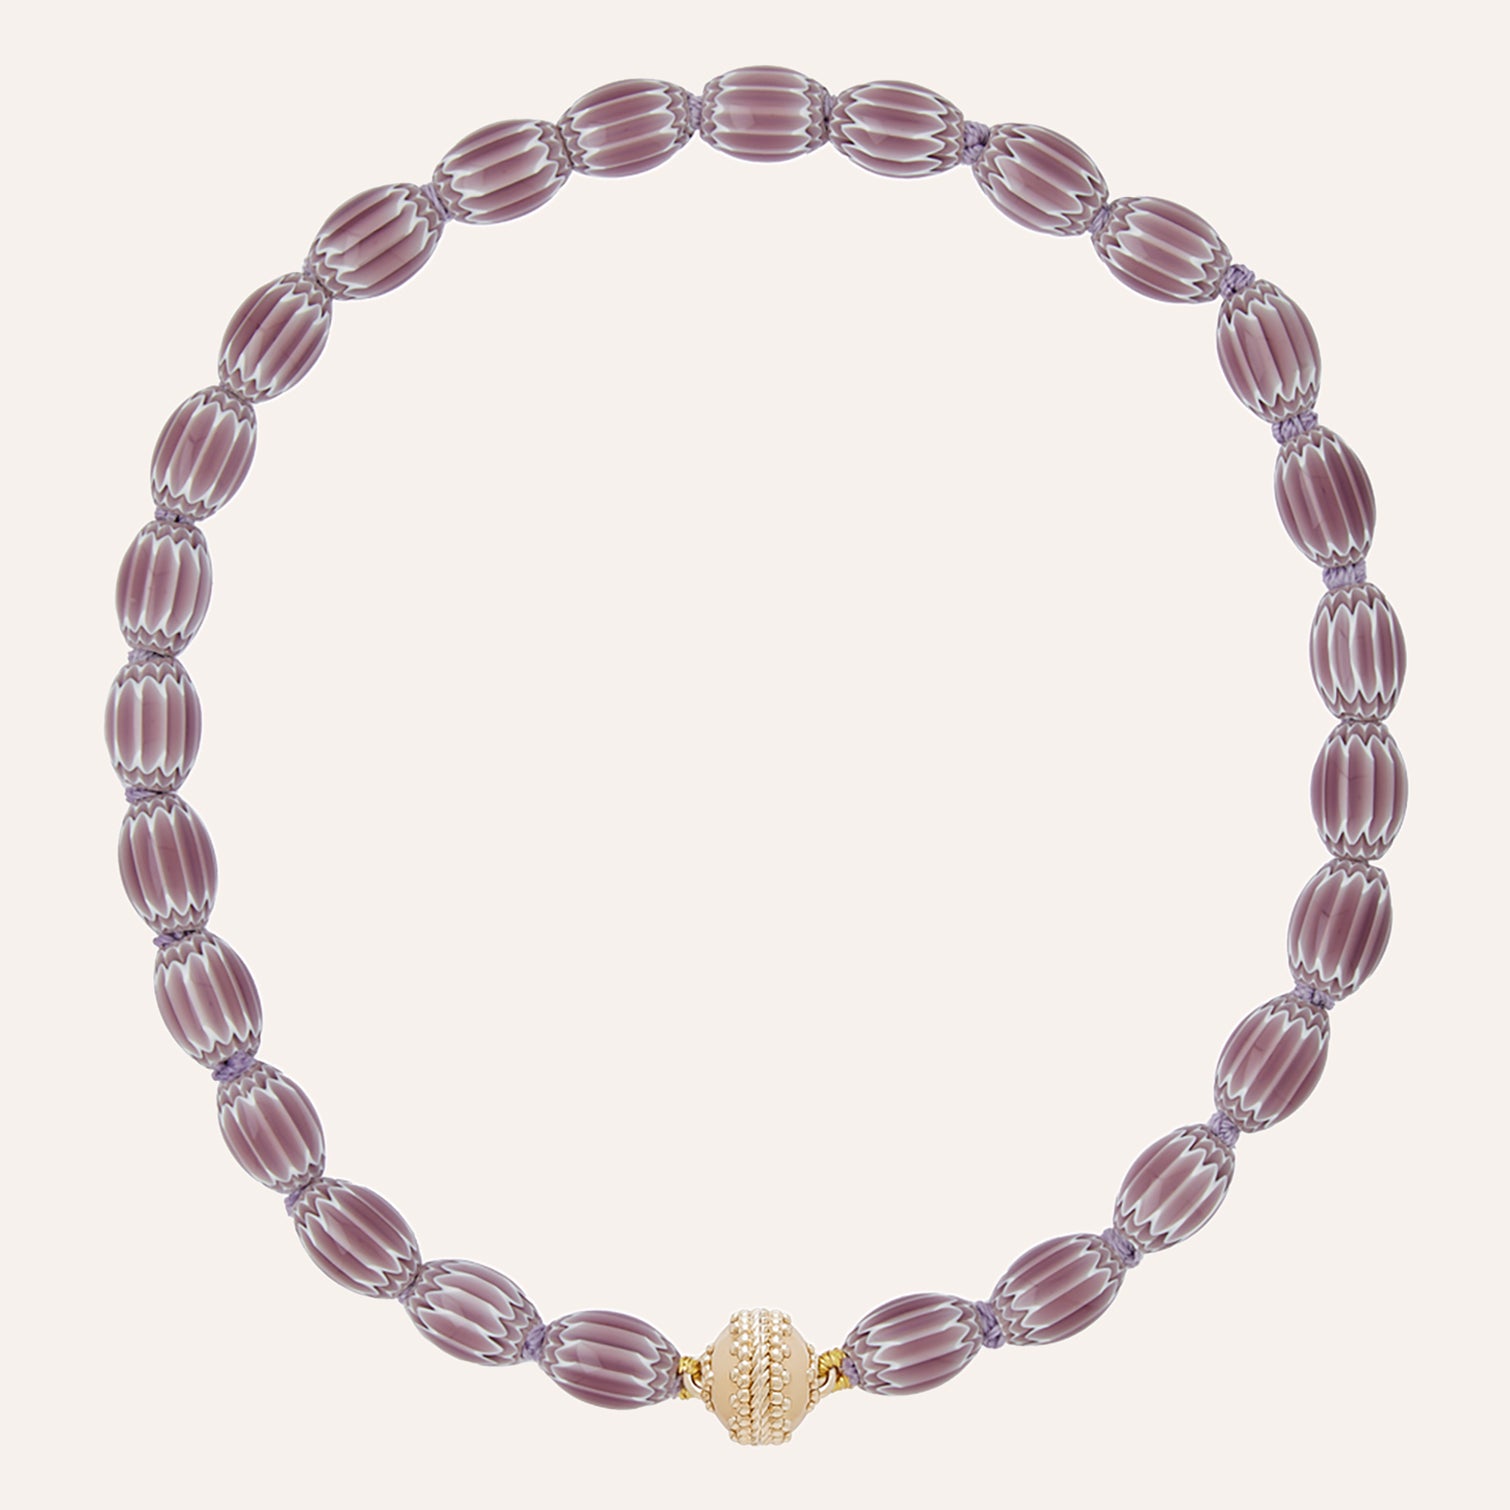 Lavender African Glass Chevron Bead Necklace